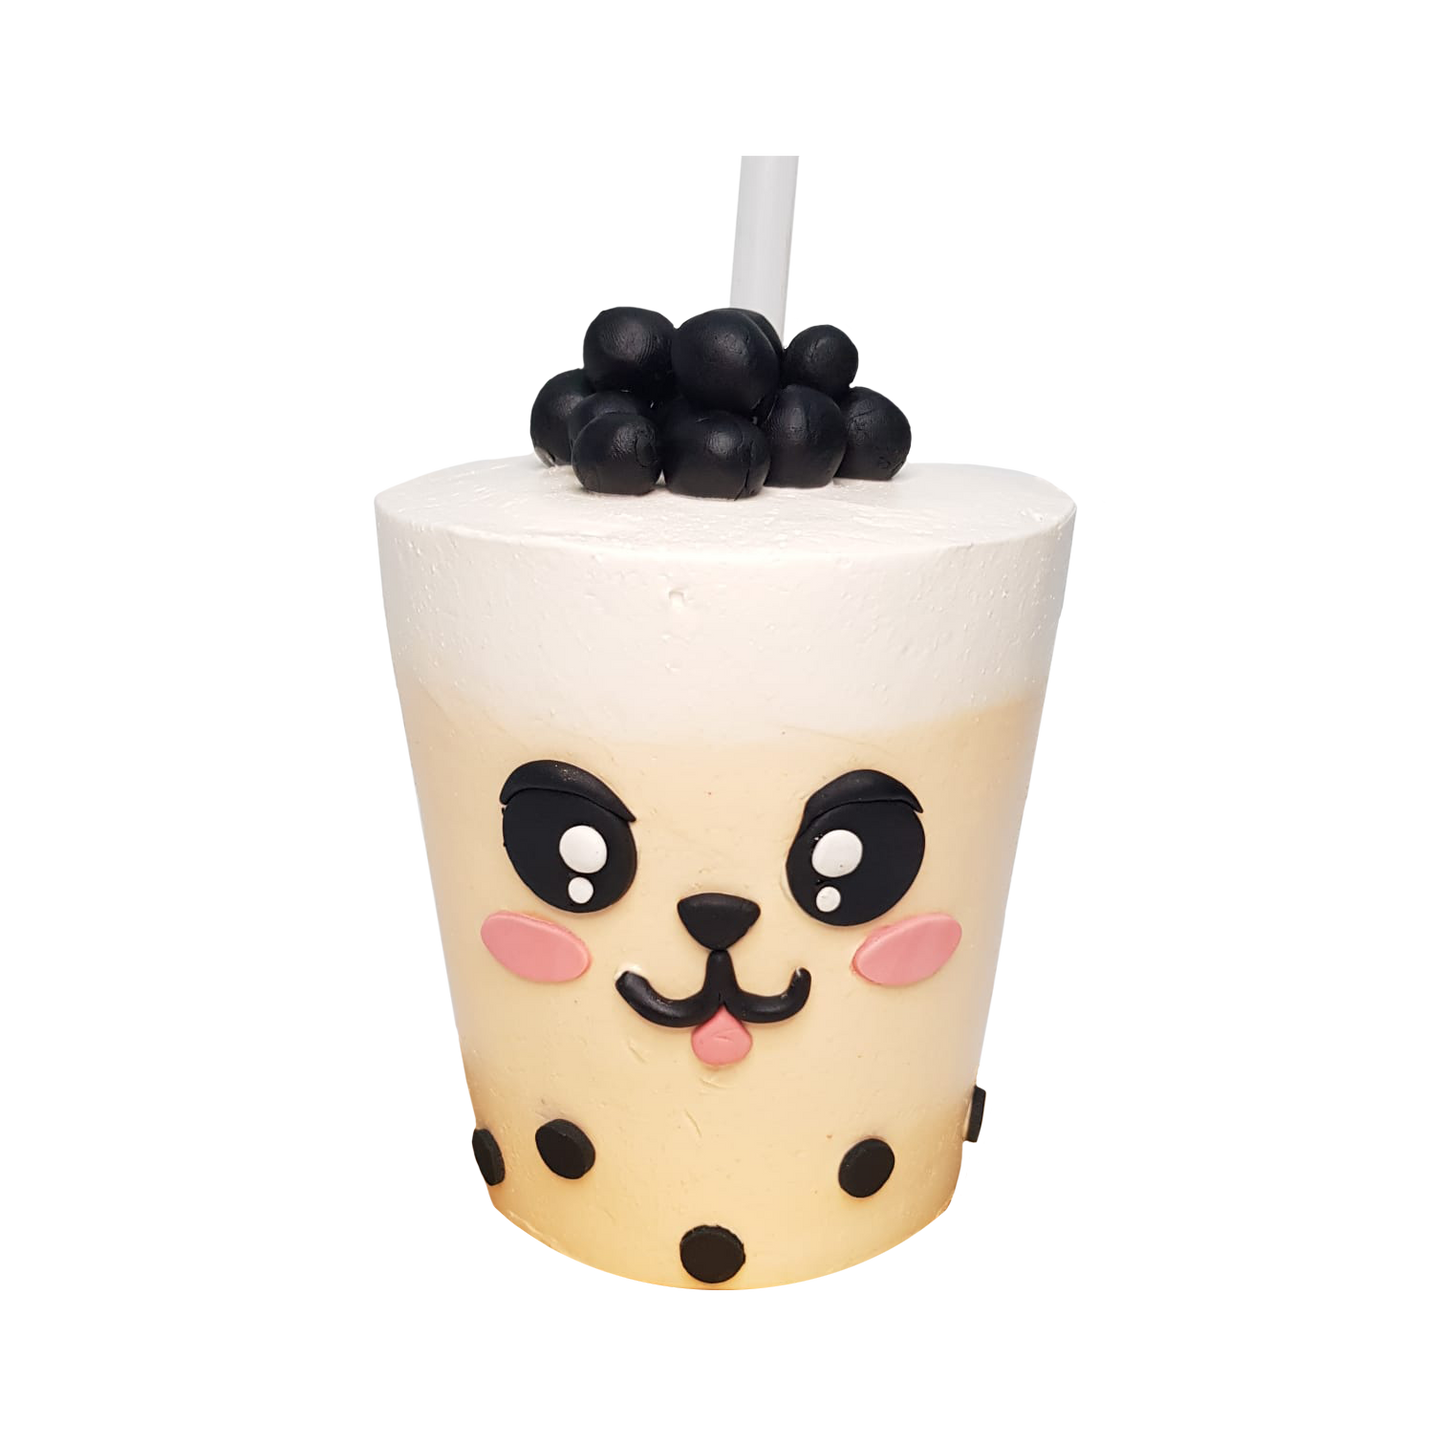 Real Bubble Tea Drink in a Cake 4